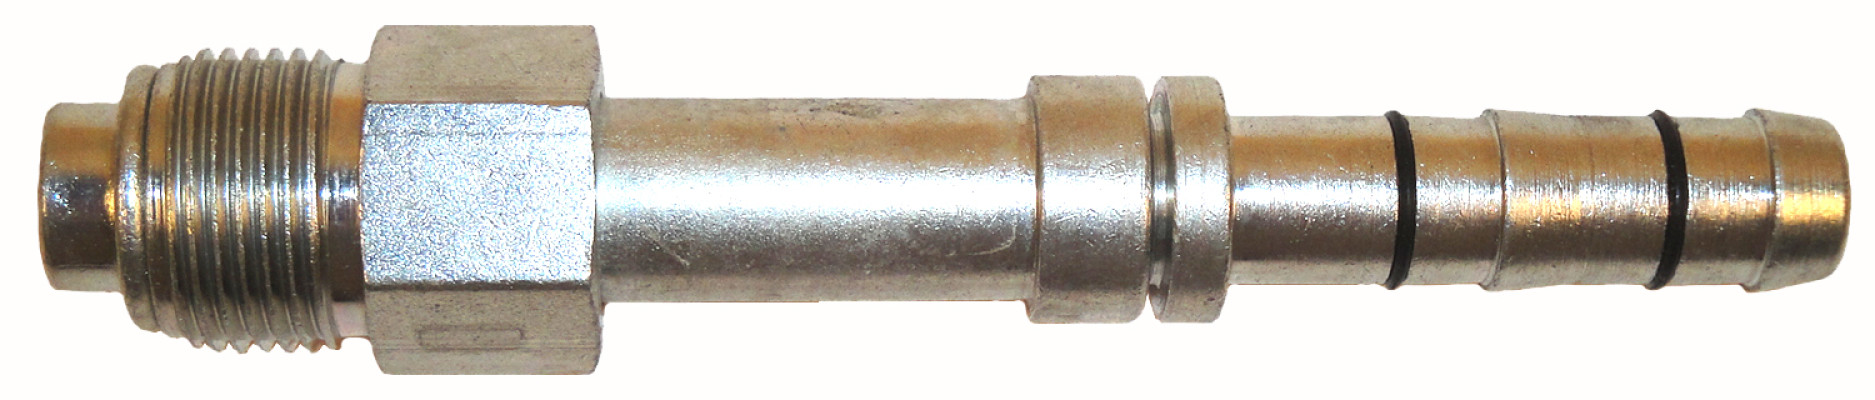 Image of A/C Refrigerant Hose Fitting from Sunair. Part number: FF14199